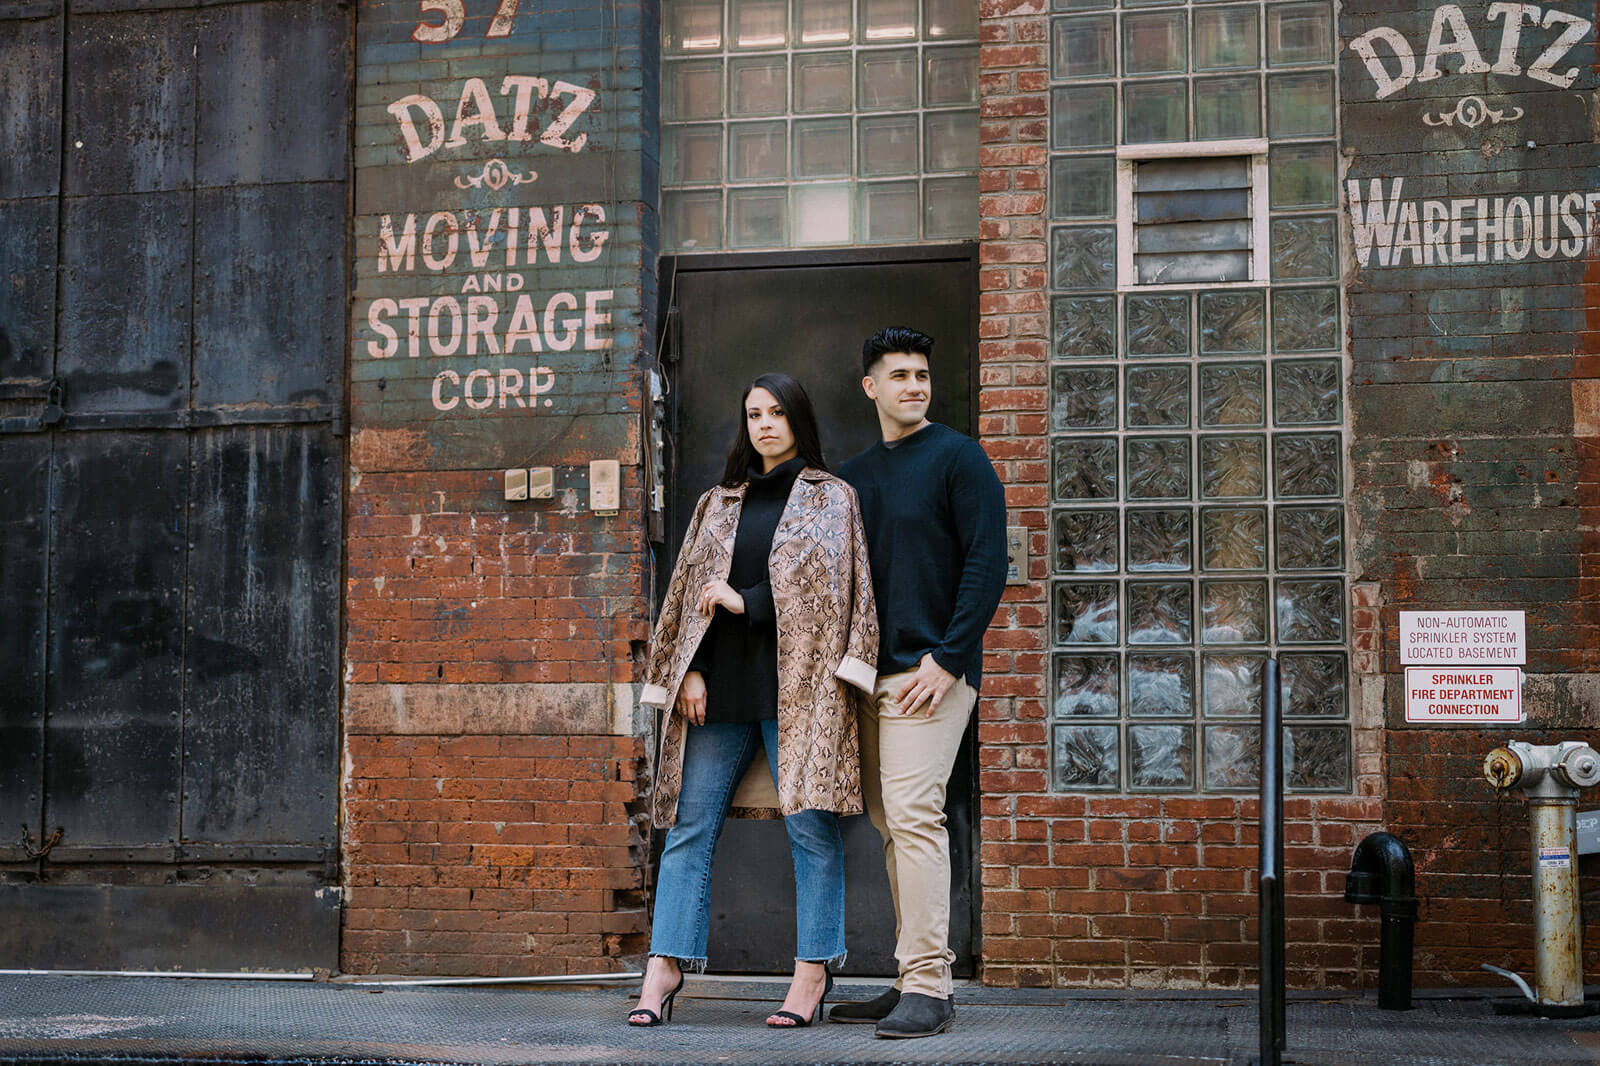 Engagement photos: An engaged couple are standing in the streets of Tribeca, New York City.